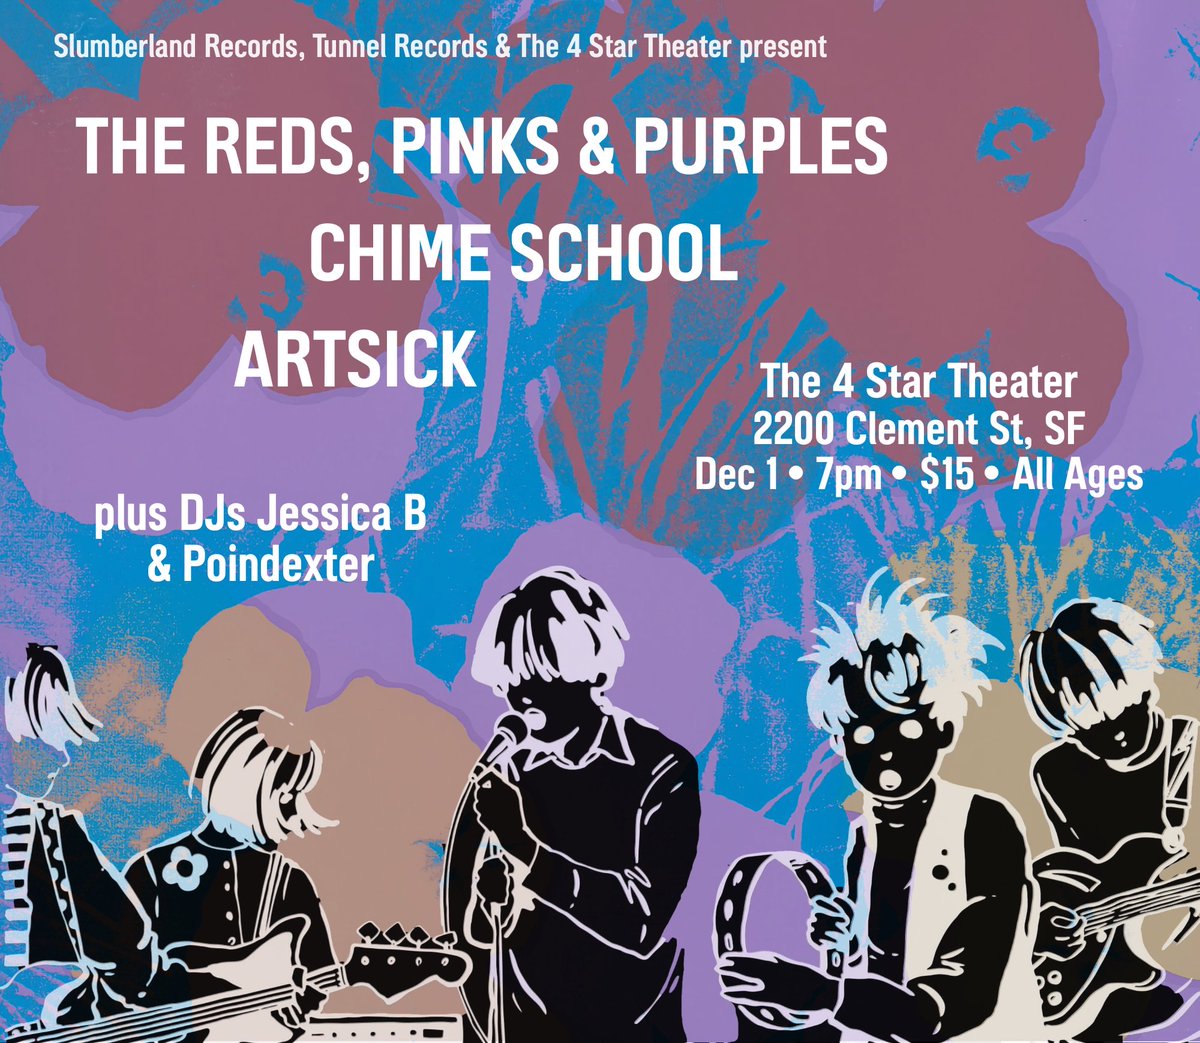 A reminder about this epic SLR party we’re having at the 4 Star Theater on December 1st: Artsick, Chime School + The Reds, Pinks & Purples are playing live, DJs Jessica B and Poindexter are spinning records, and @tunnelrecordssf will have SLR recs galore. 4-star-movies.com/calendar-of-ev…